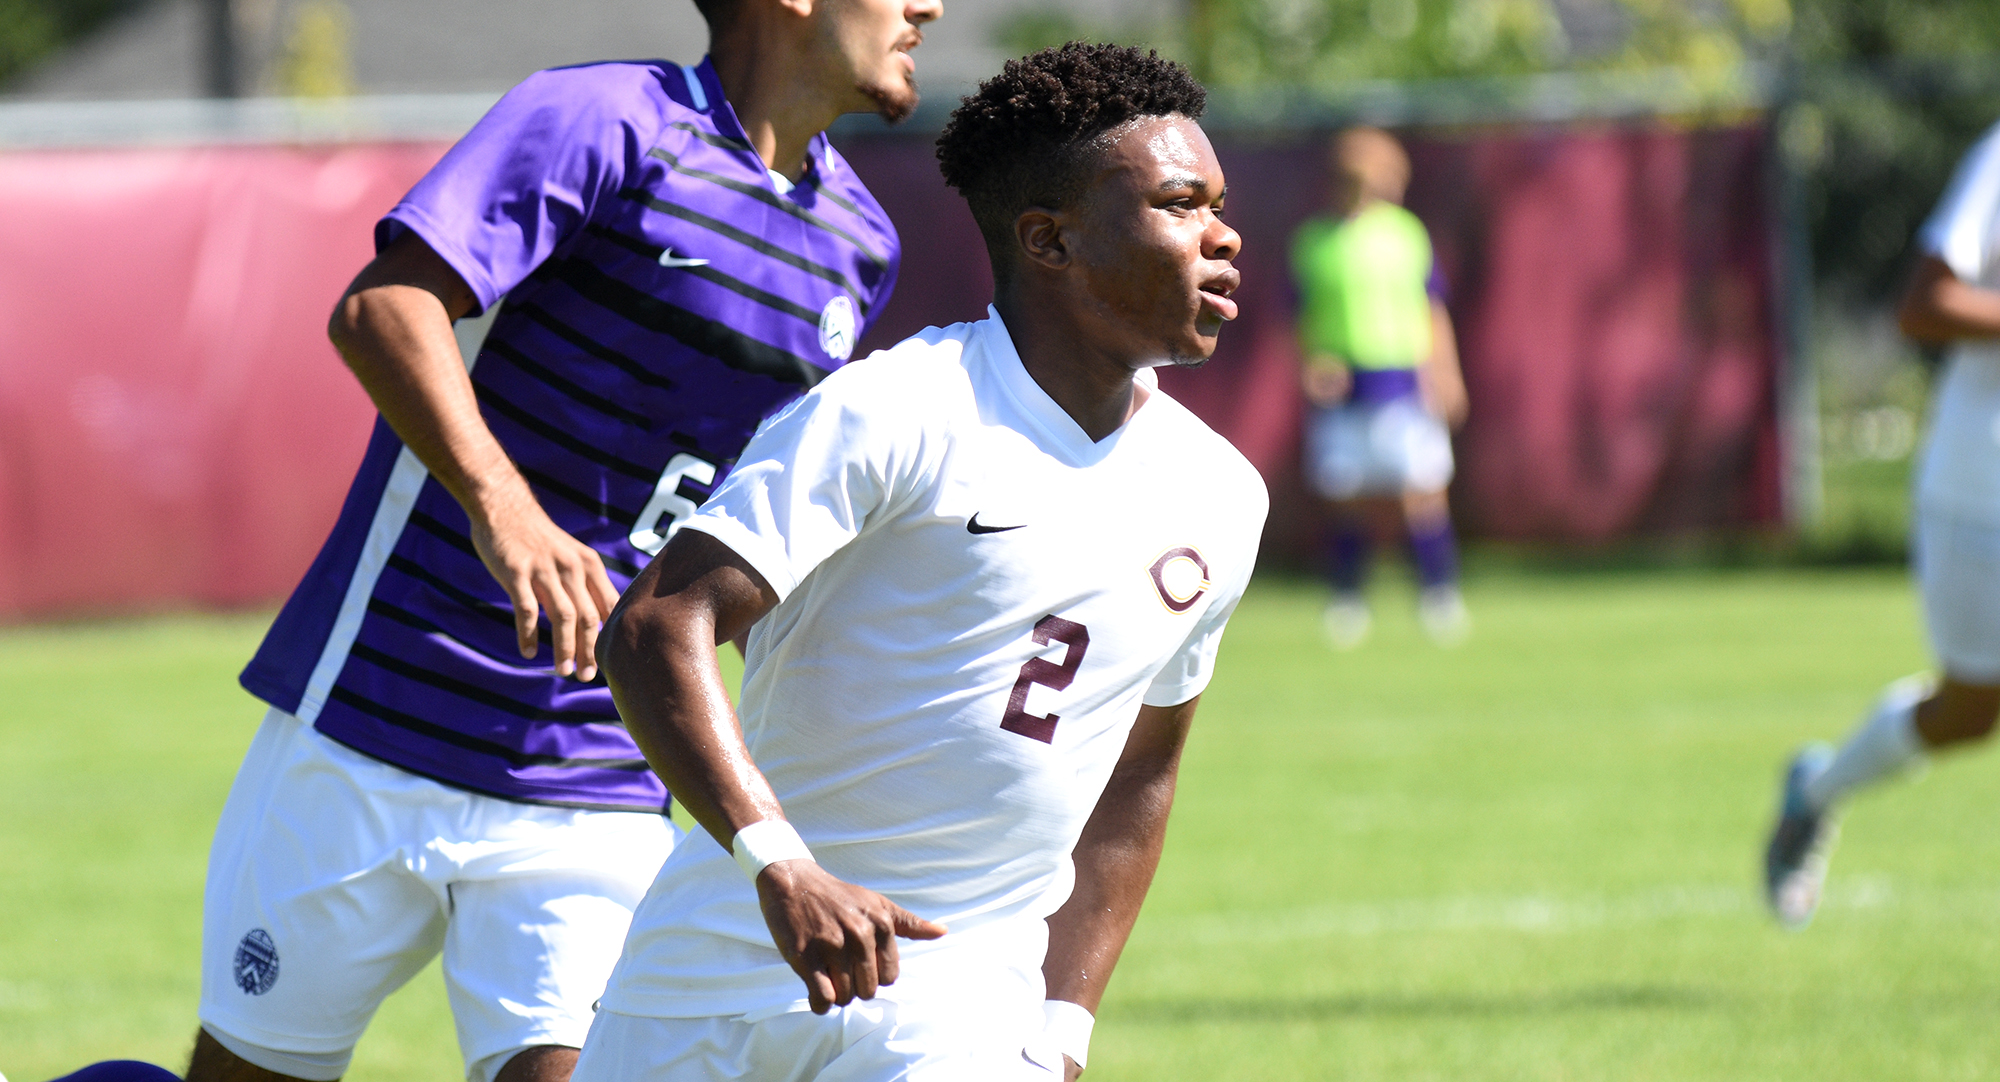 Senior Patrick Smith scored the Cobbers first goal in their game with Concordia (Tex.).